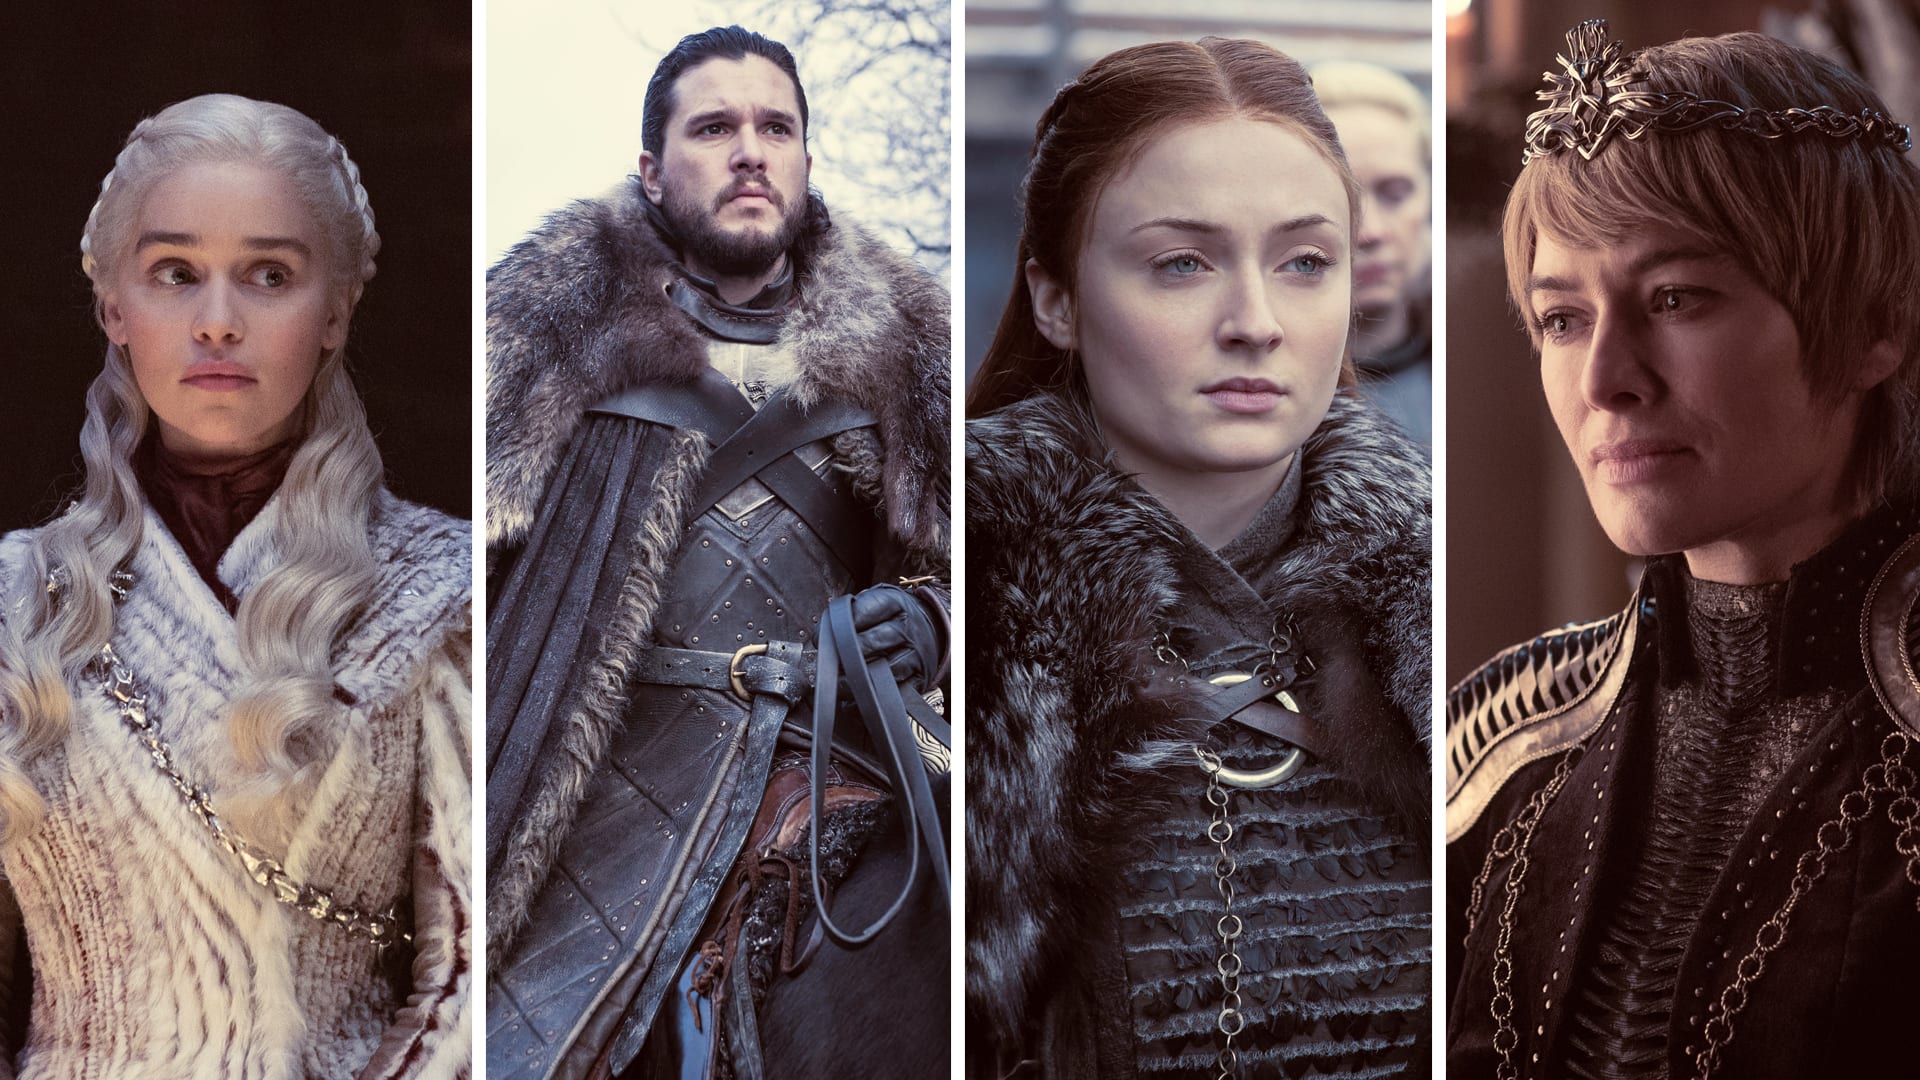 The four leadership styles still left standing on “Game of Thrones”